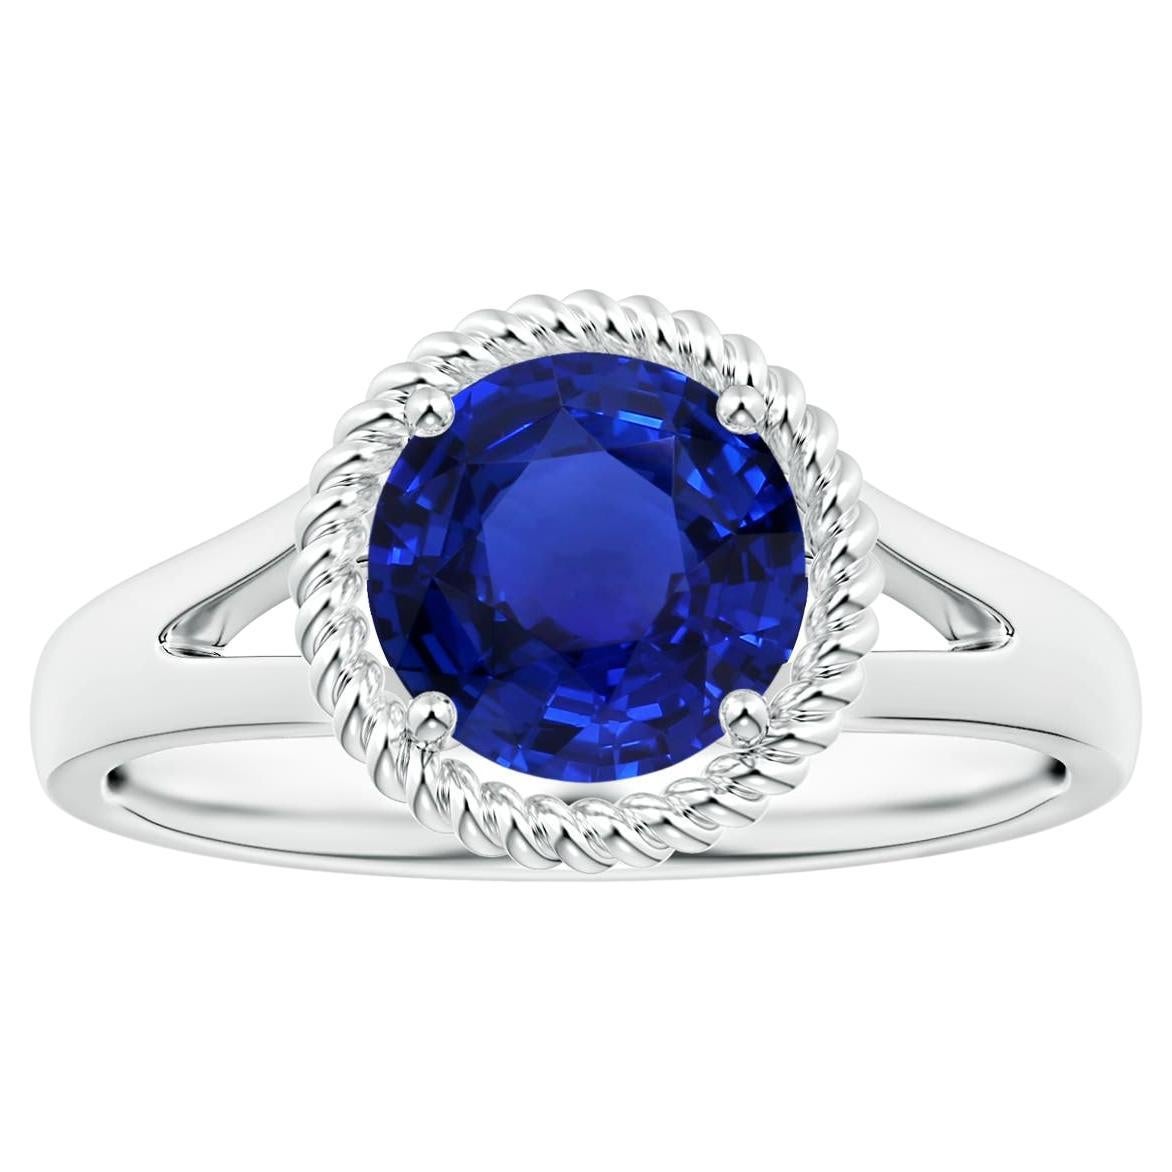 For Sale:  ANGARA GIA Certified Natural Blue Sapphire Halo Ring in White Gold